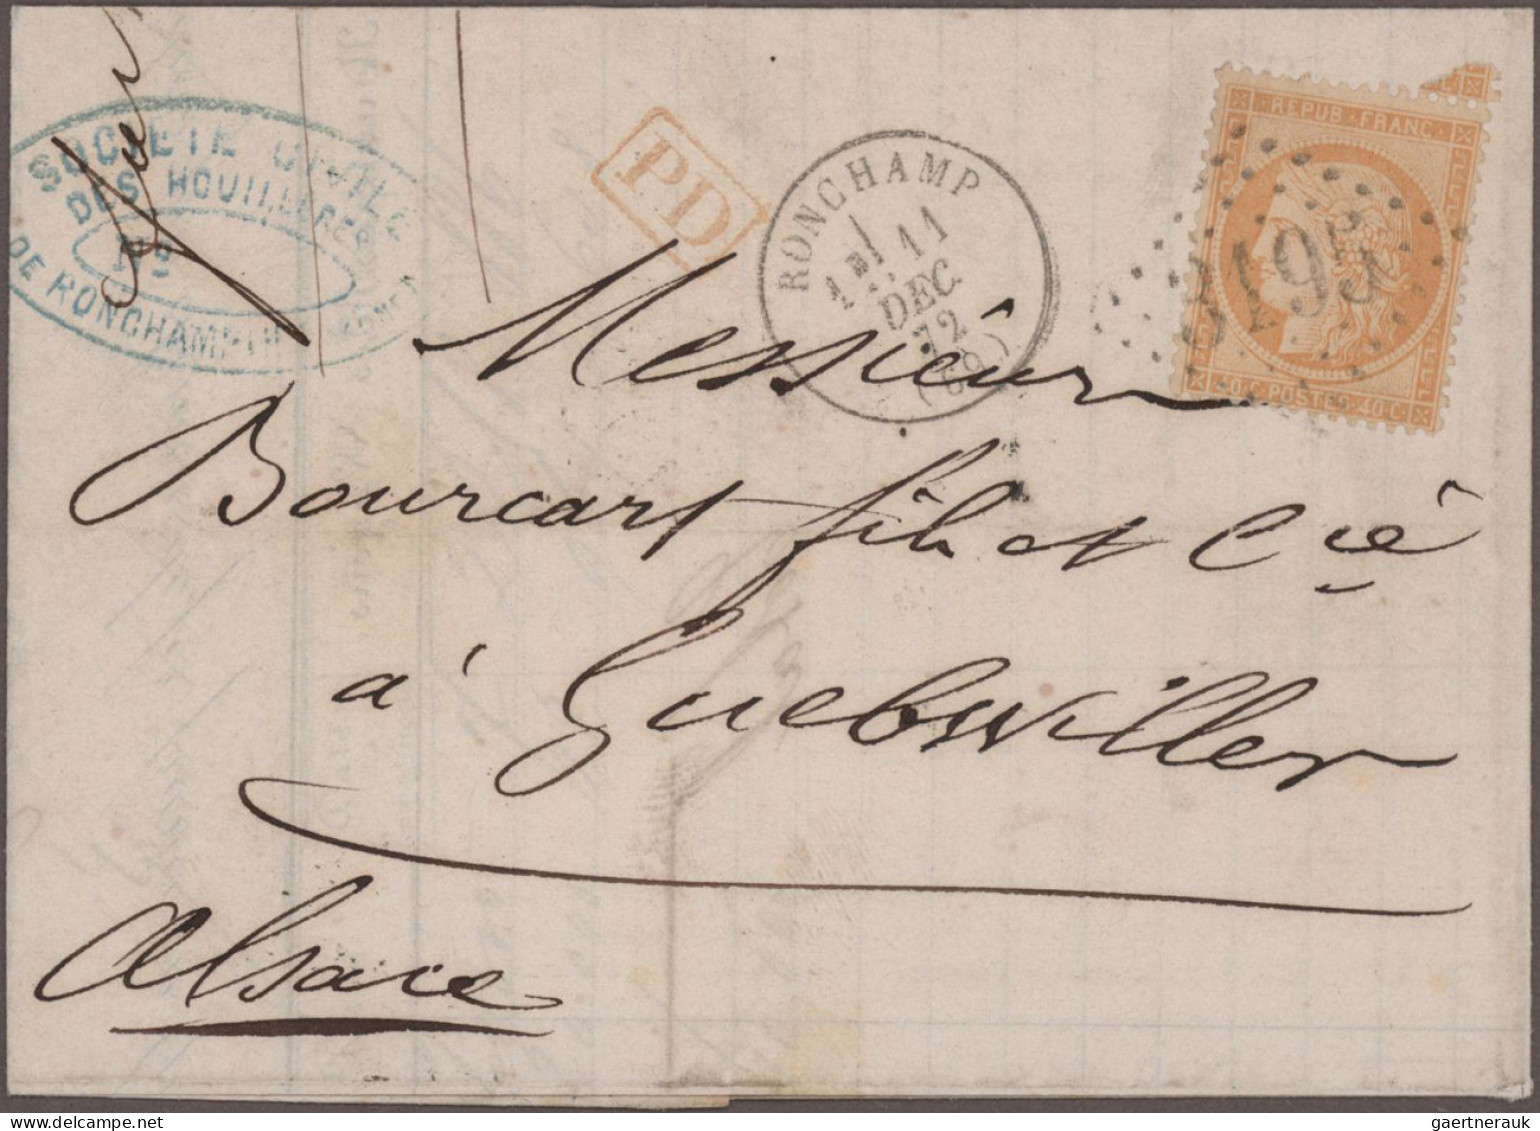 France: 1857-1876 Foreign destinations: Collection of 12 letters/covers to forei